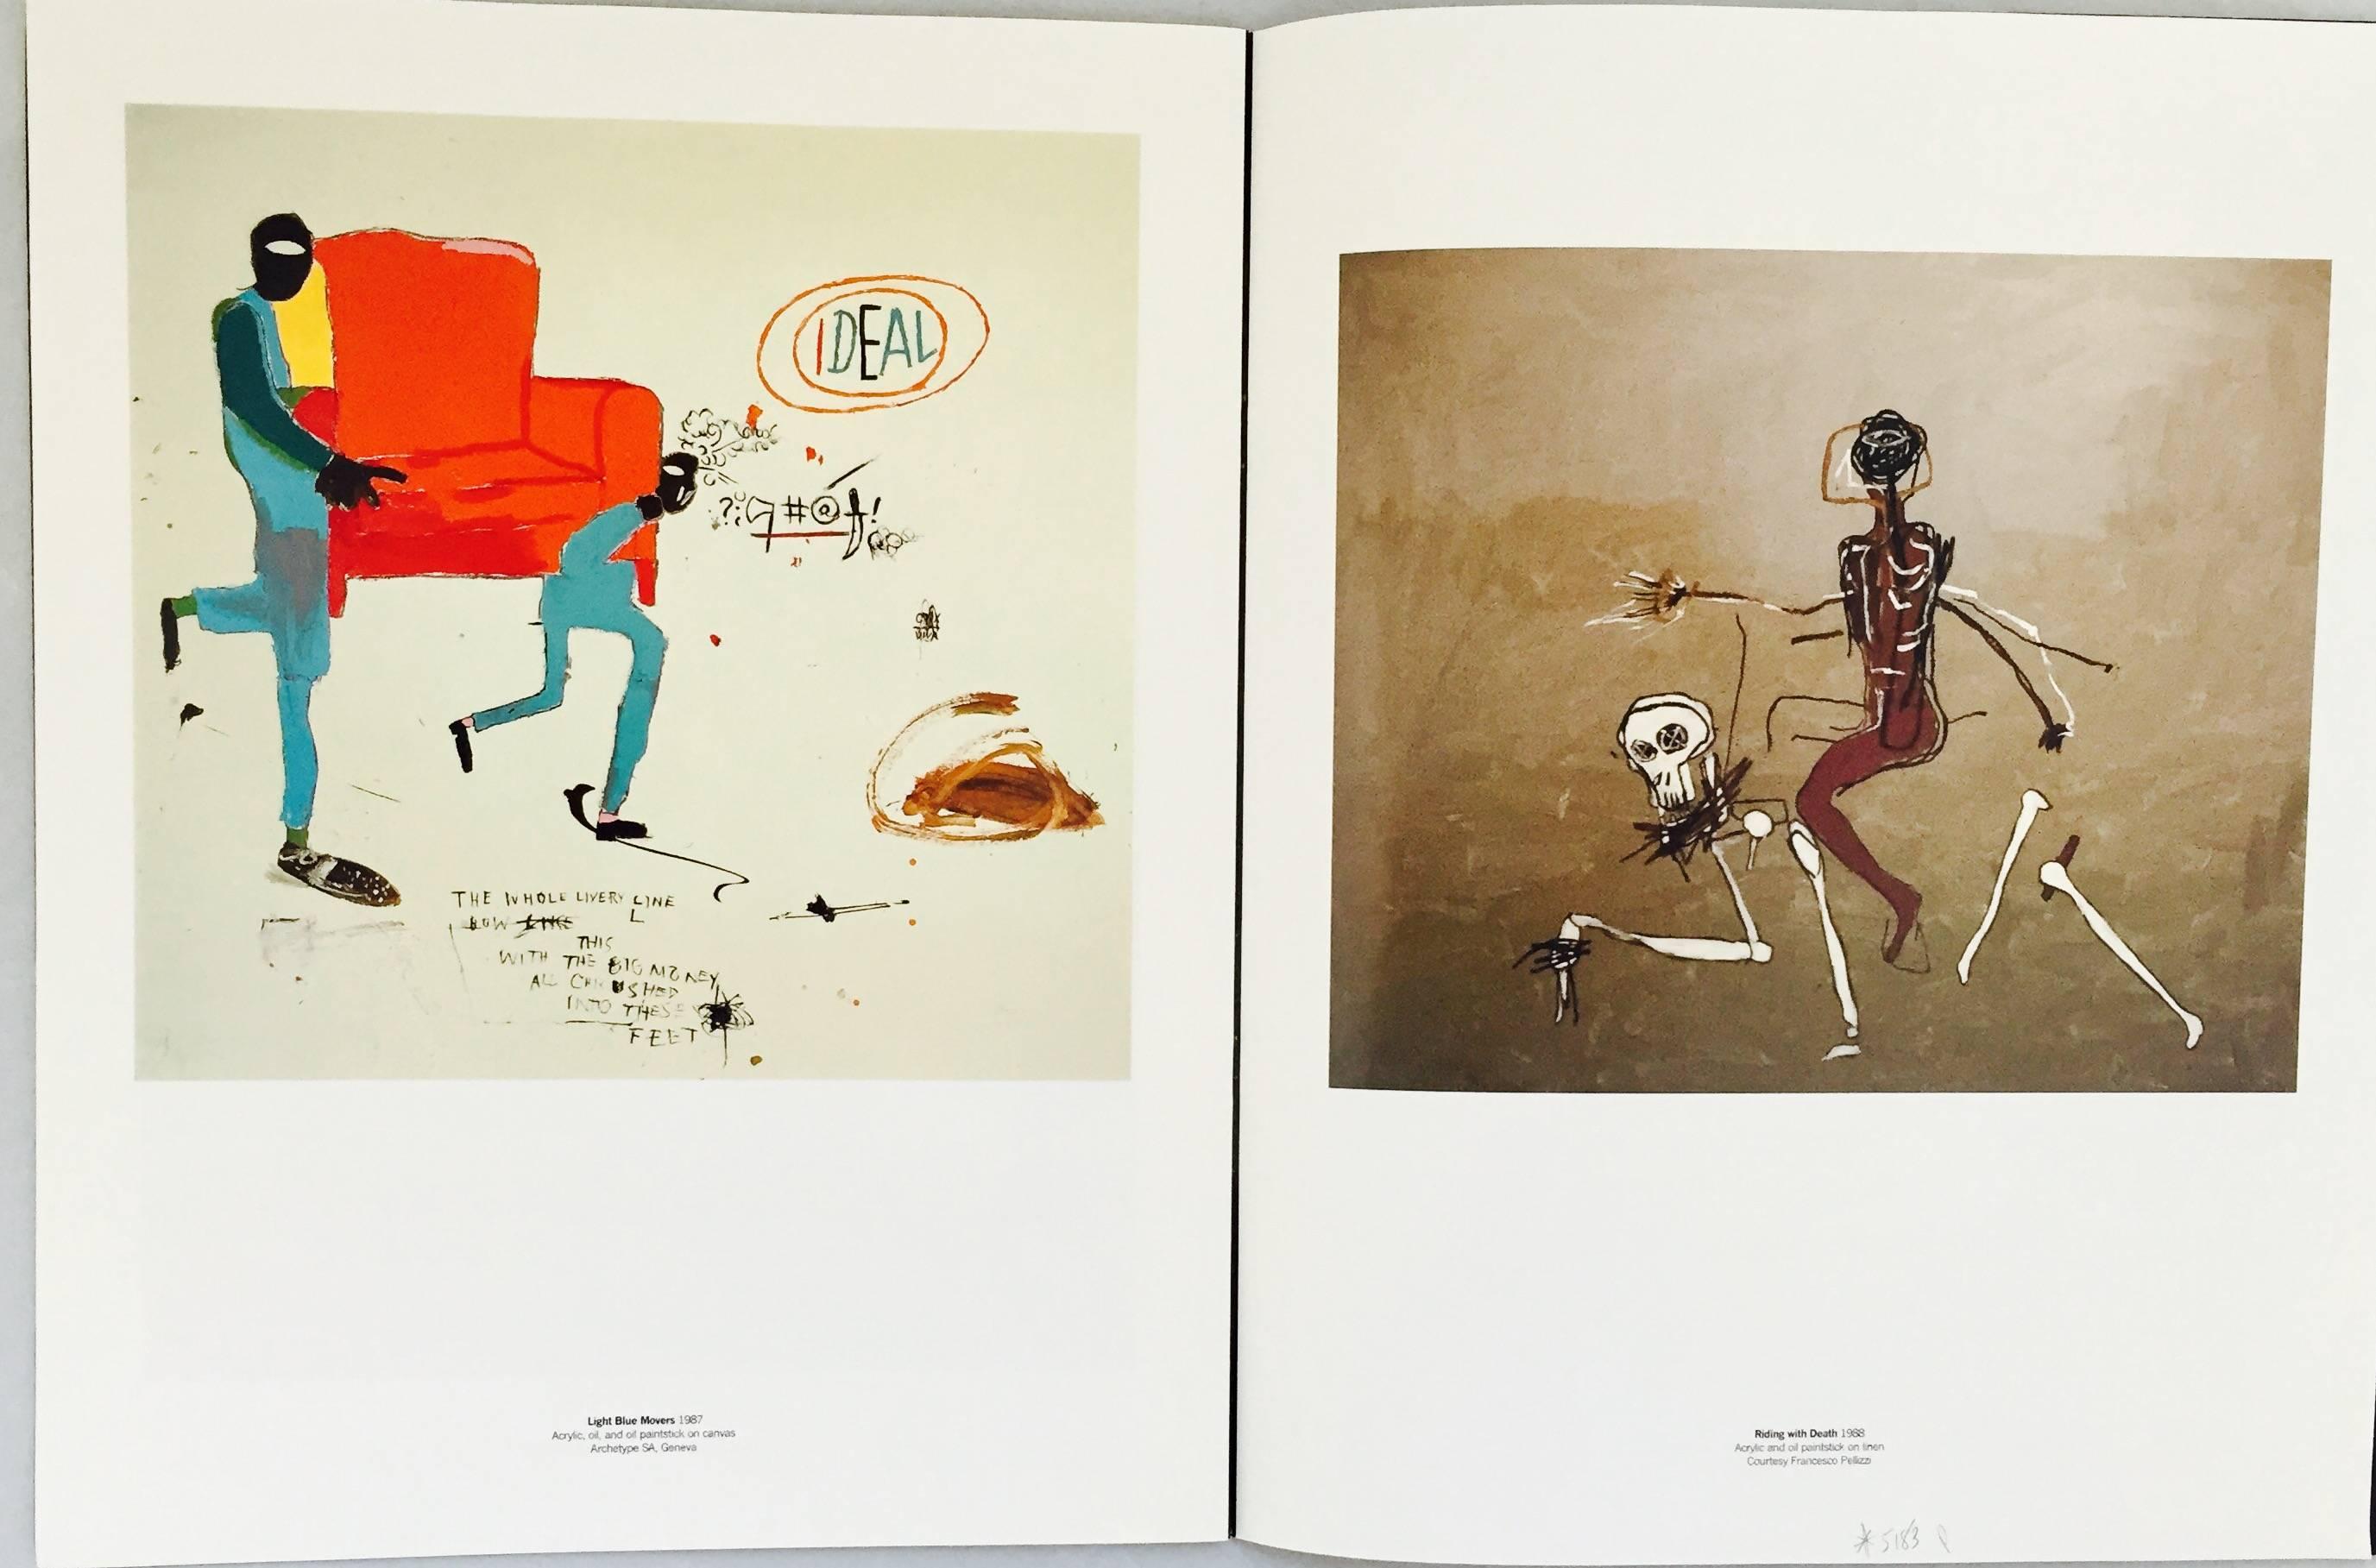 Basquiat Serpentine Gallery Exhibition Catalog 1996:
Jean-Michel Basquiat, Serpentine Gallery, London (6 March - 21 April 1996).

This important UK exhibition brought together major paintings from throughout Jean-Michel Basquiat’s brief career, and